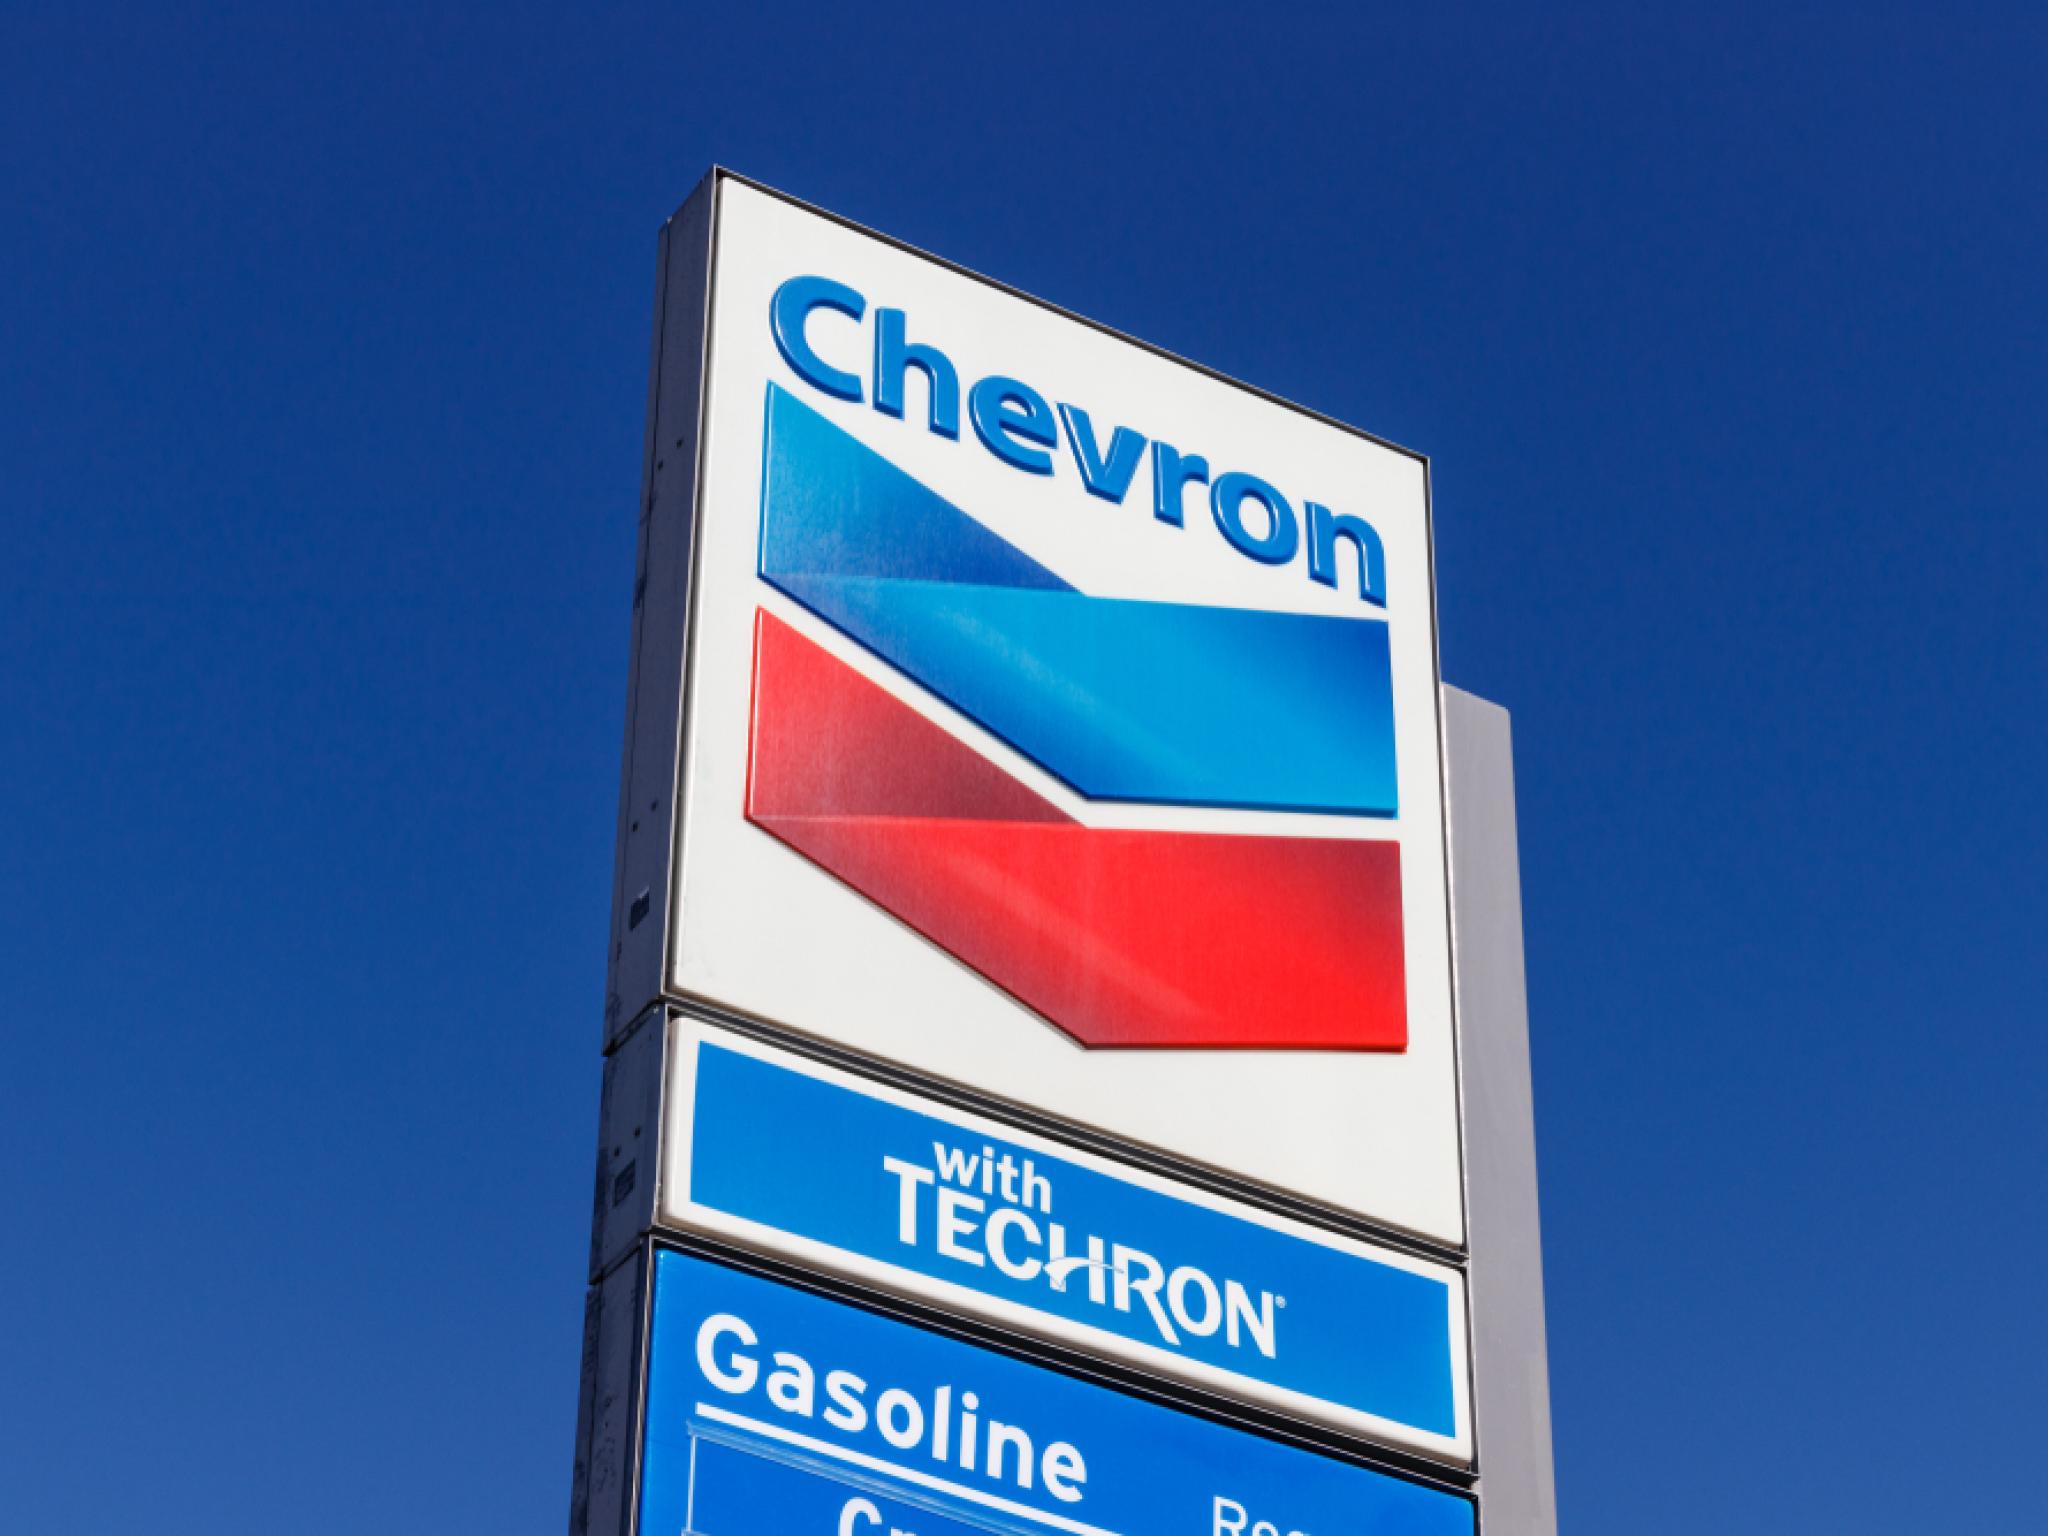  hess-chevron-merger-hits-snag-as-arbitration-delays-put-timeline-in-doubt-report 